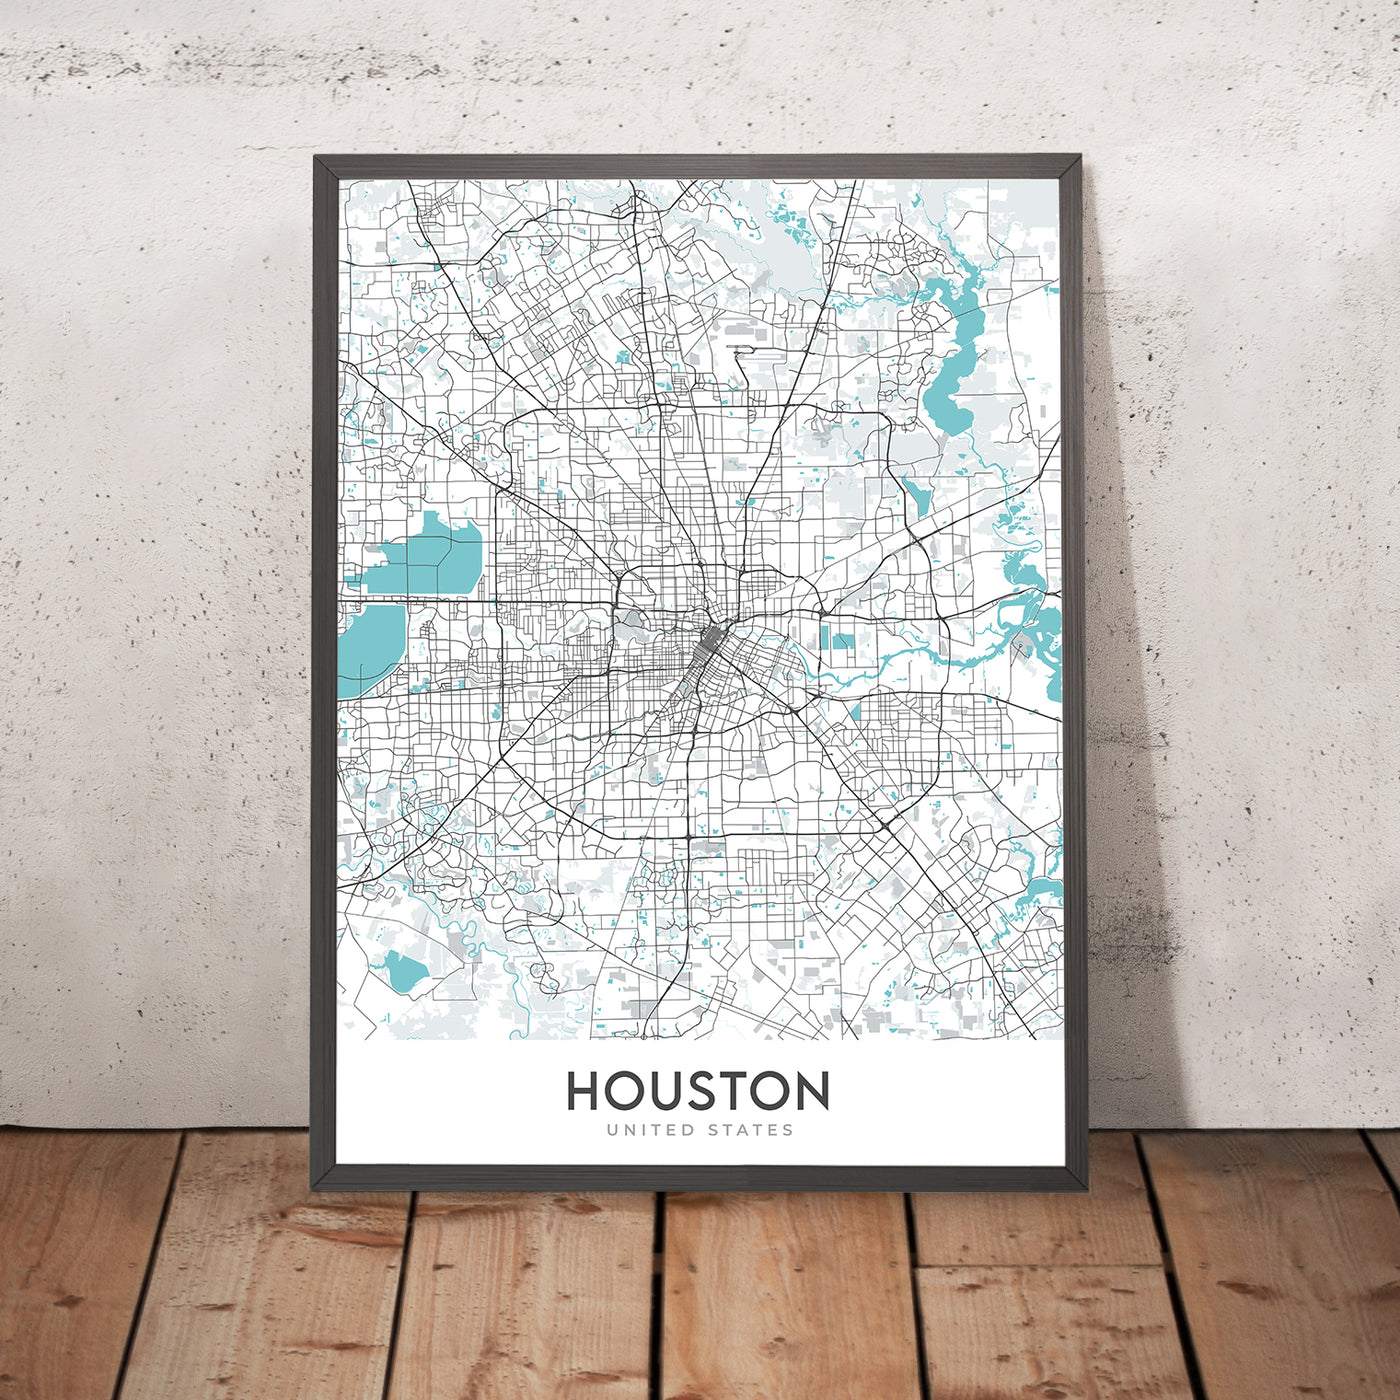 Modern City Map of Houston, TX: Downtown, Minute Maid Park, The Galleria, I-10, I-45